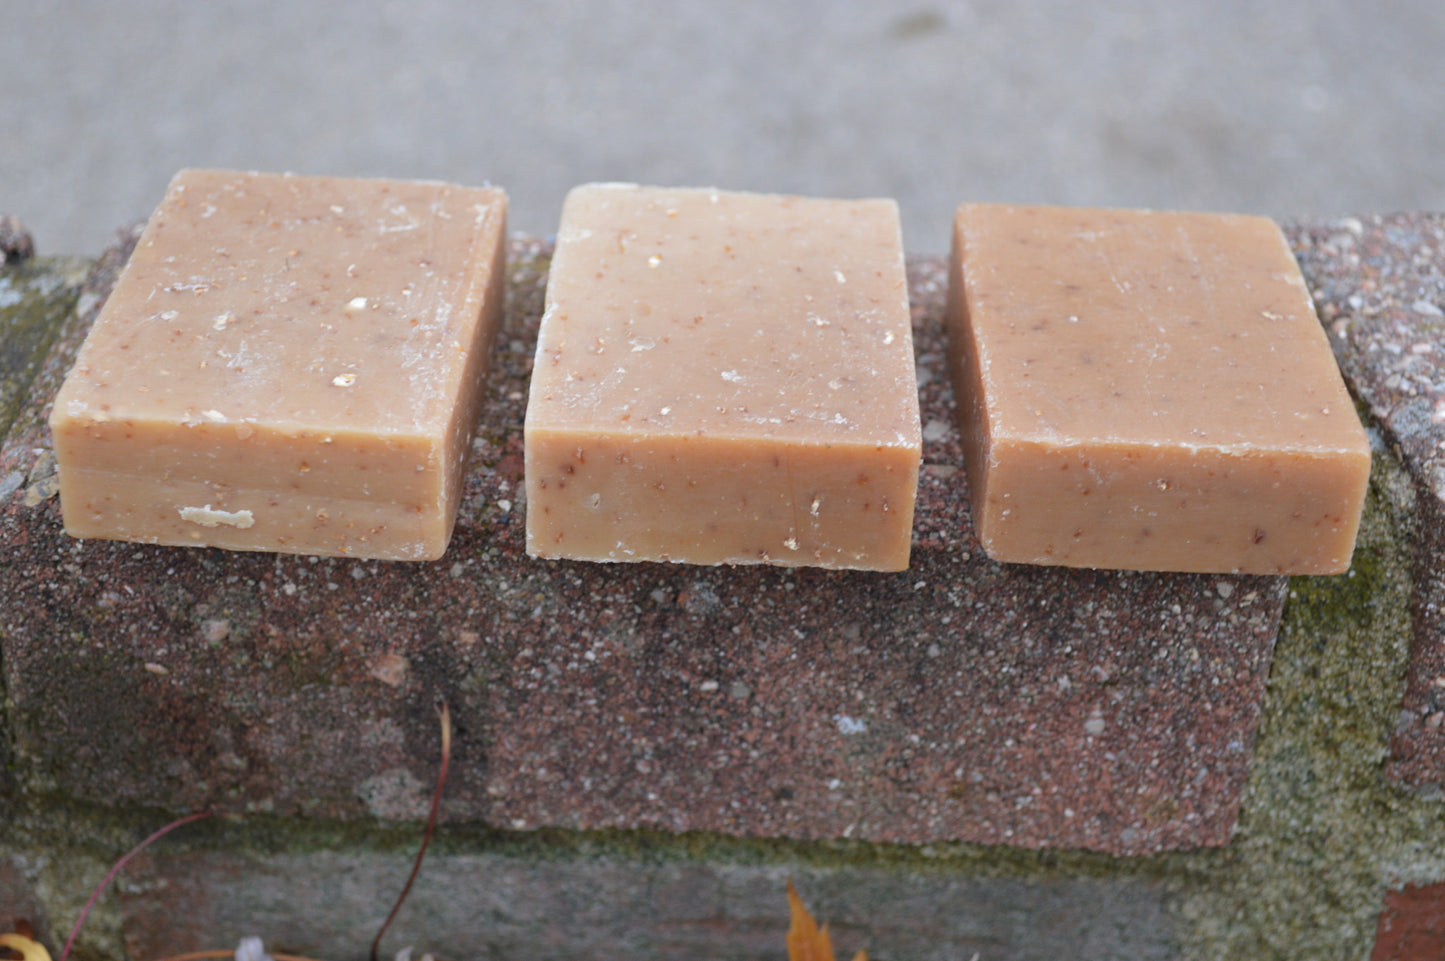 Oatmeal, Honey and Cocoa Butter Soap